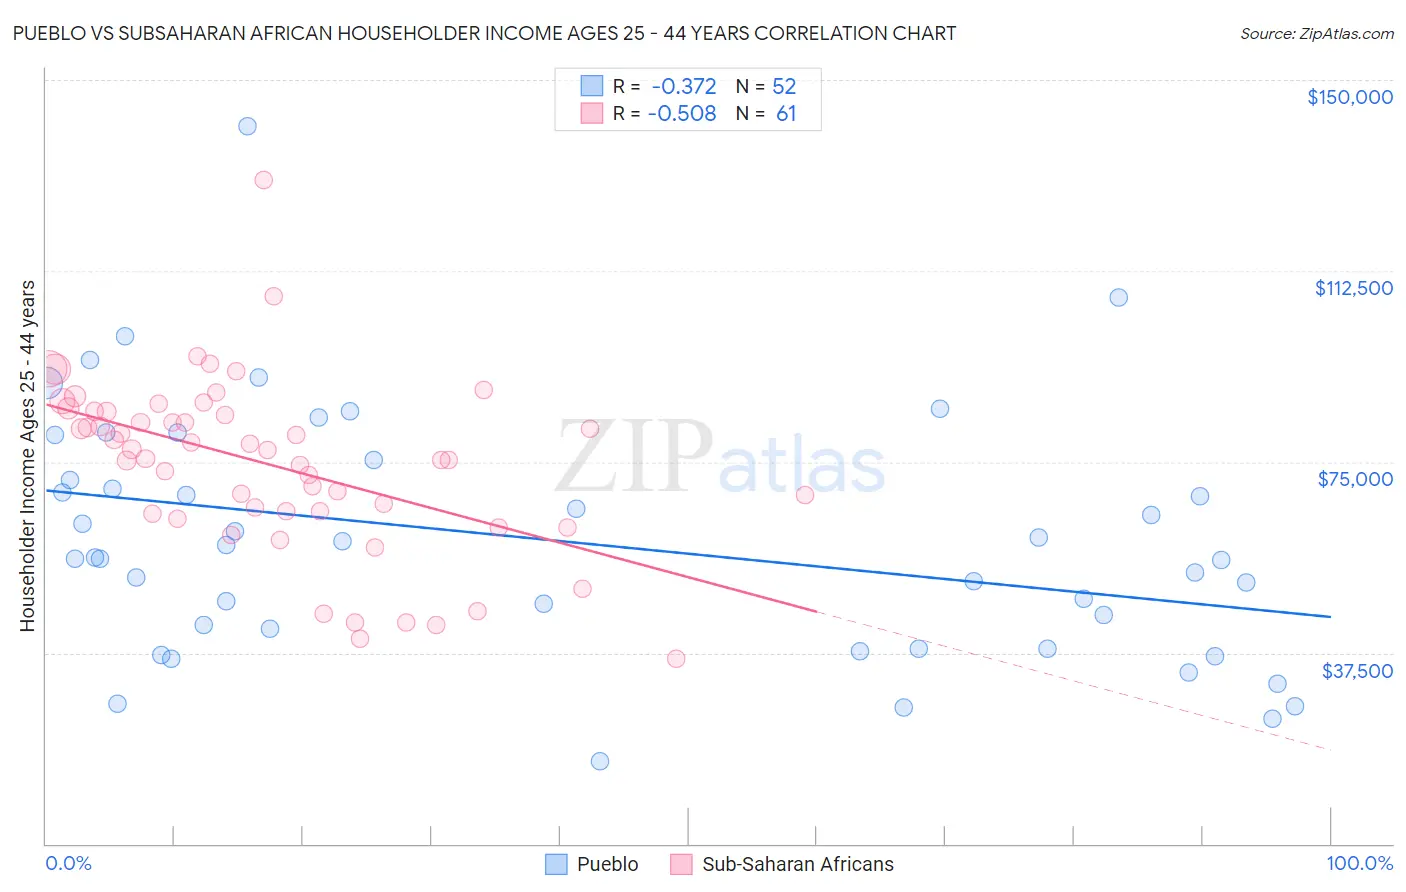 Pueblo vs Subsaharan African Householder Income Ages 25 - 44 years